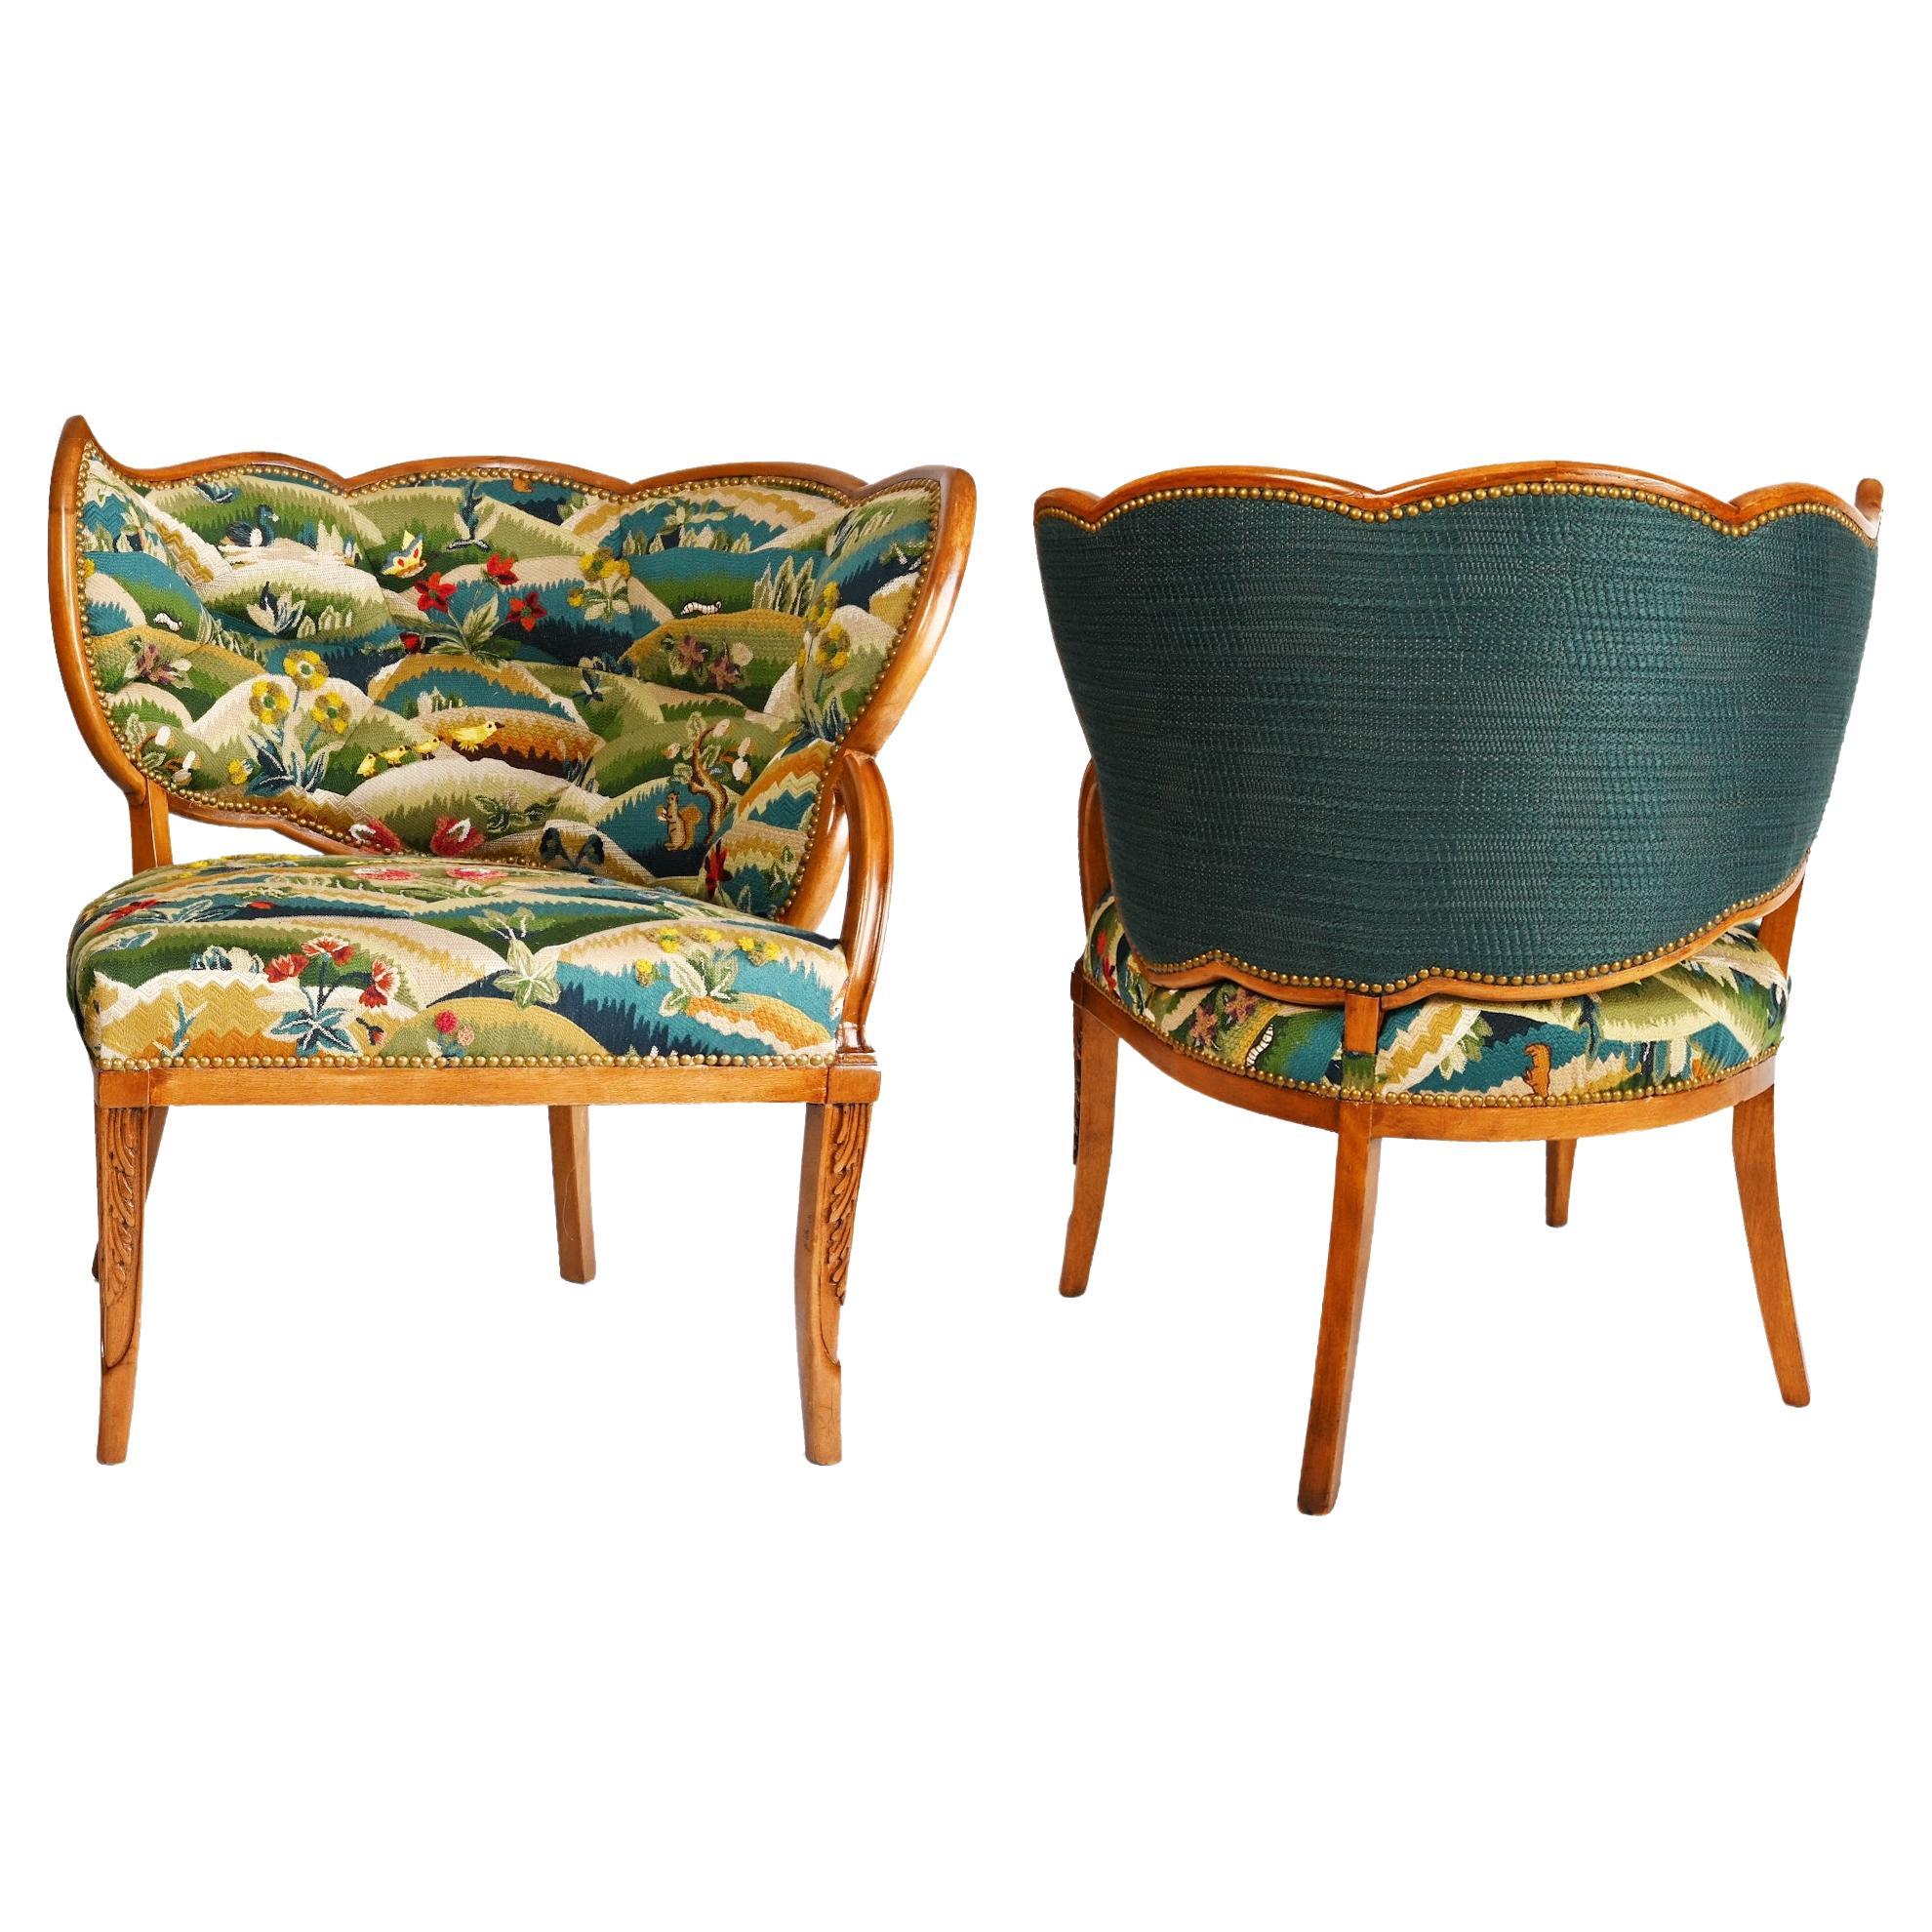 A Pair of French Tapestry Upholstered Open Armchairs